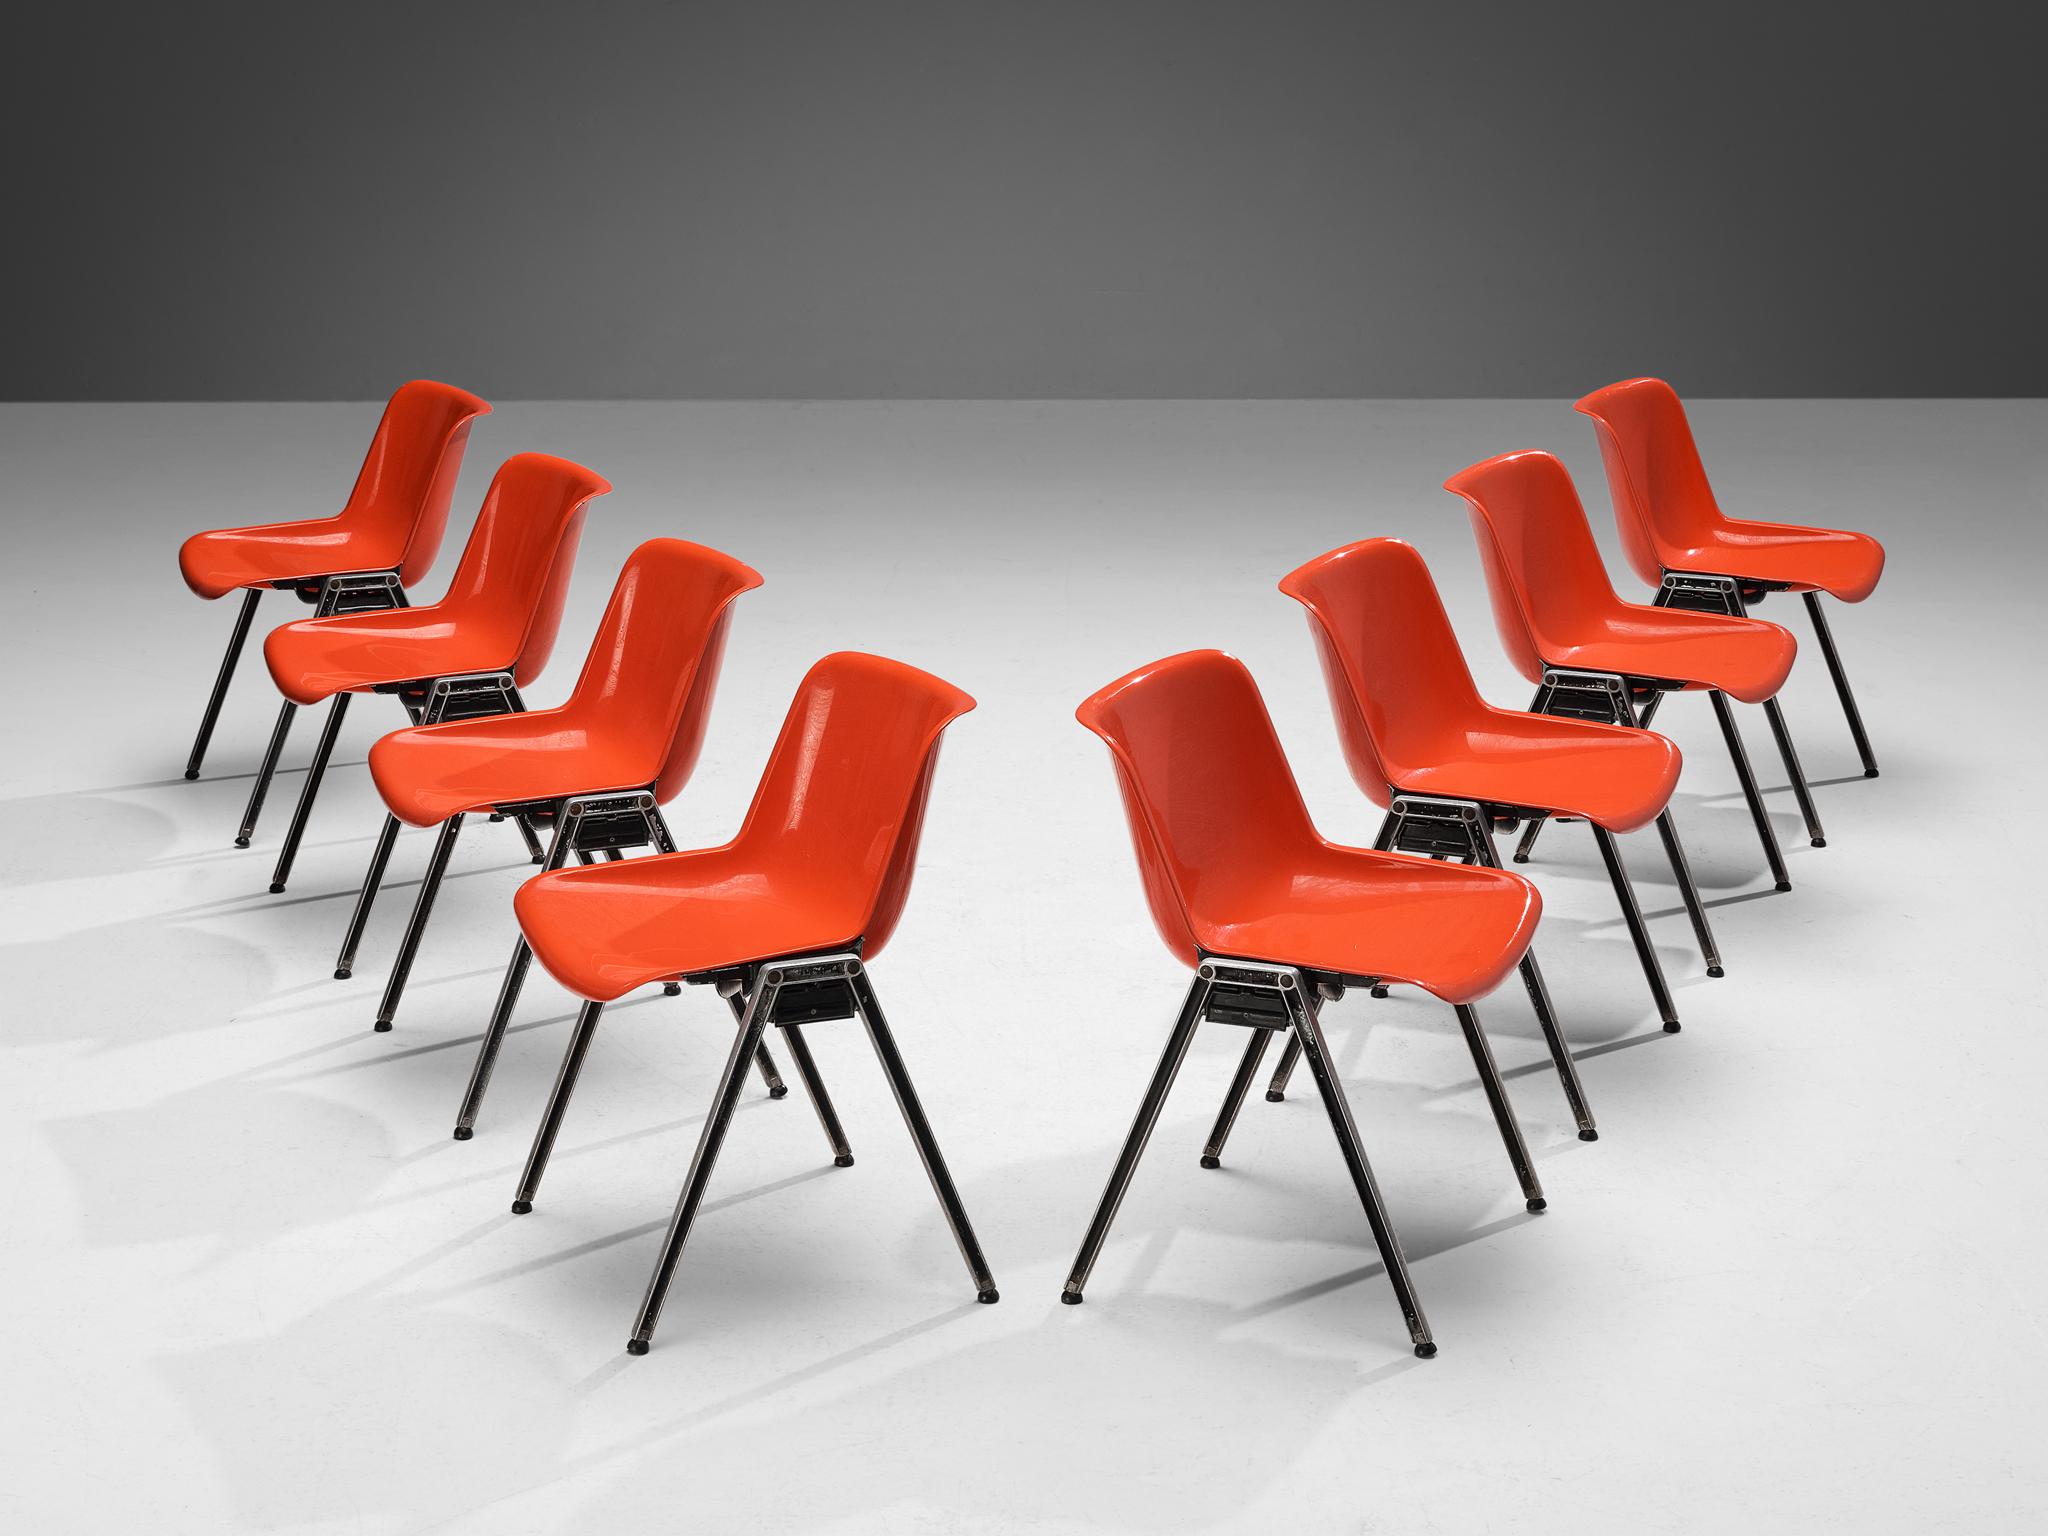 Centro Progetti Tecno, set of eight stackable chairs model ‘Modus', nylon / plastic, aluminum, metal, Italy, 1970s.

Highly functional chairs designed by Centro Progetti Tecno that are part of the Modus seating system, the first project to initiate